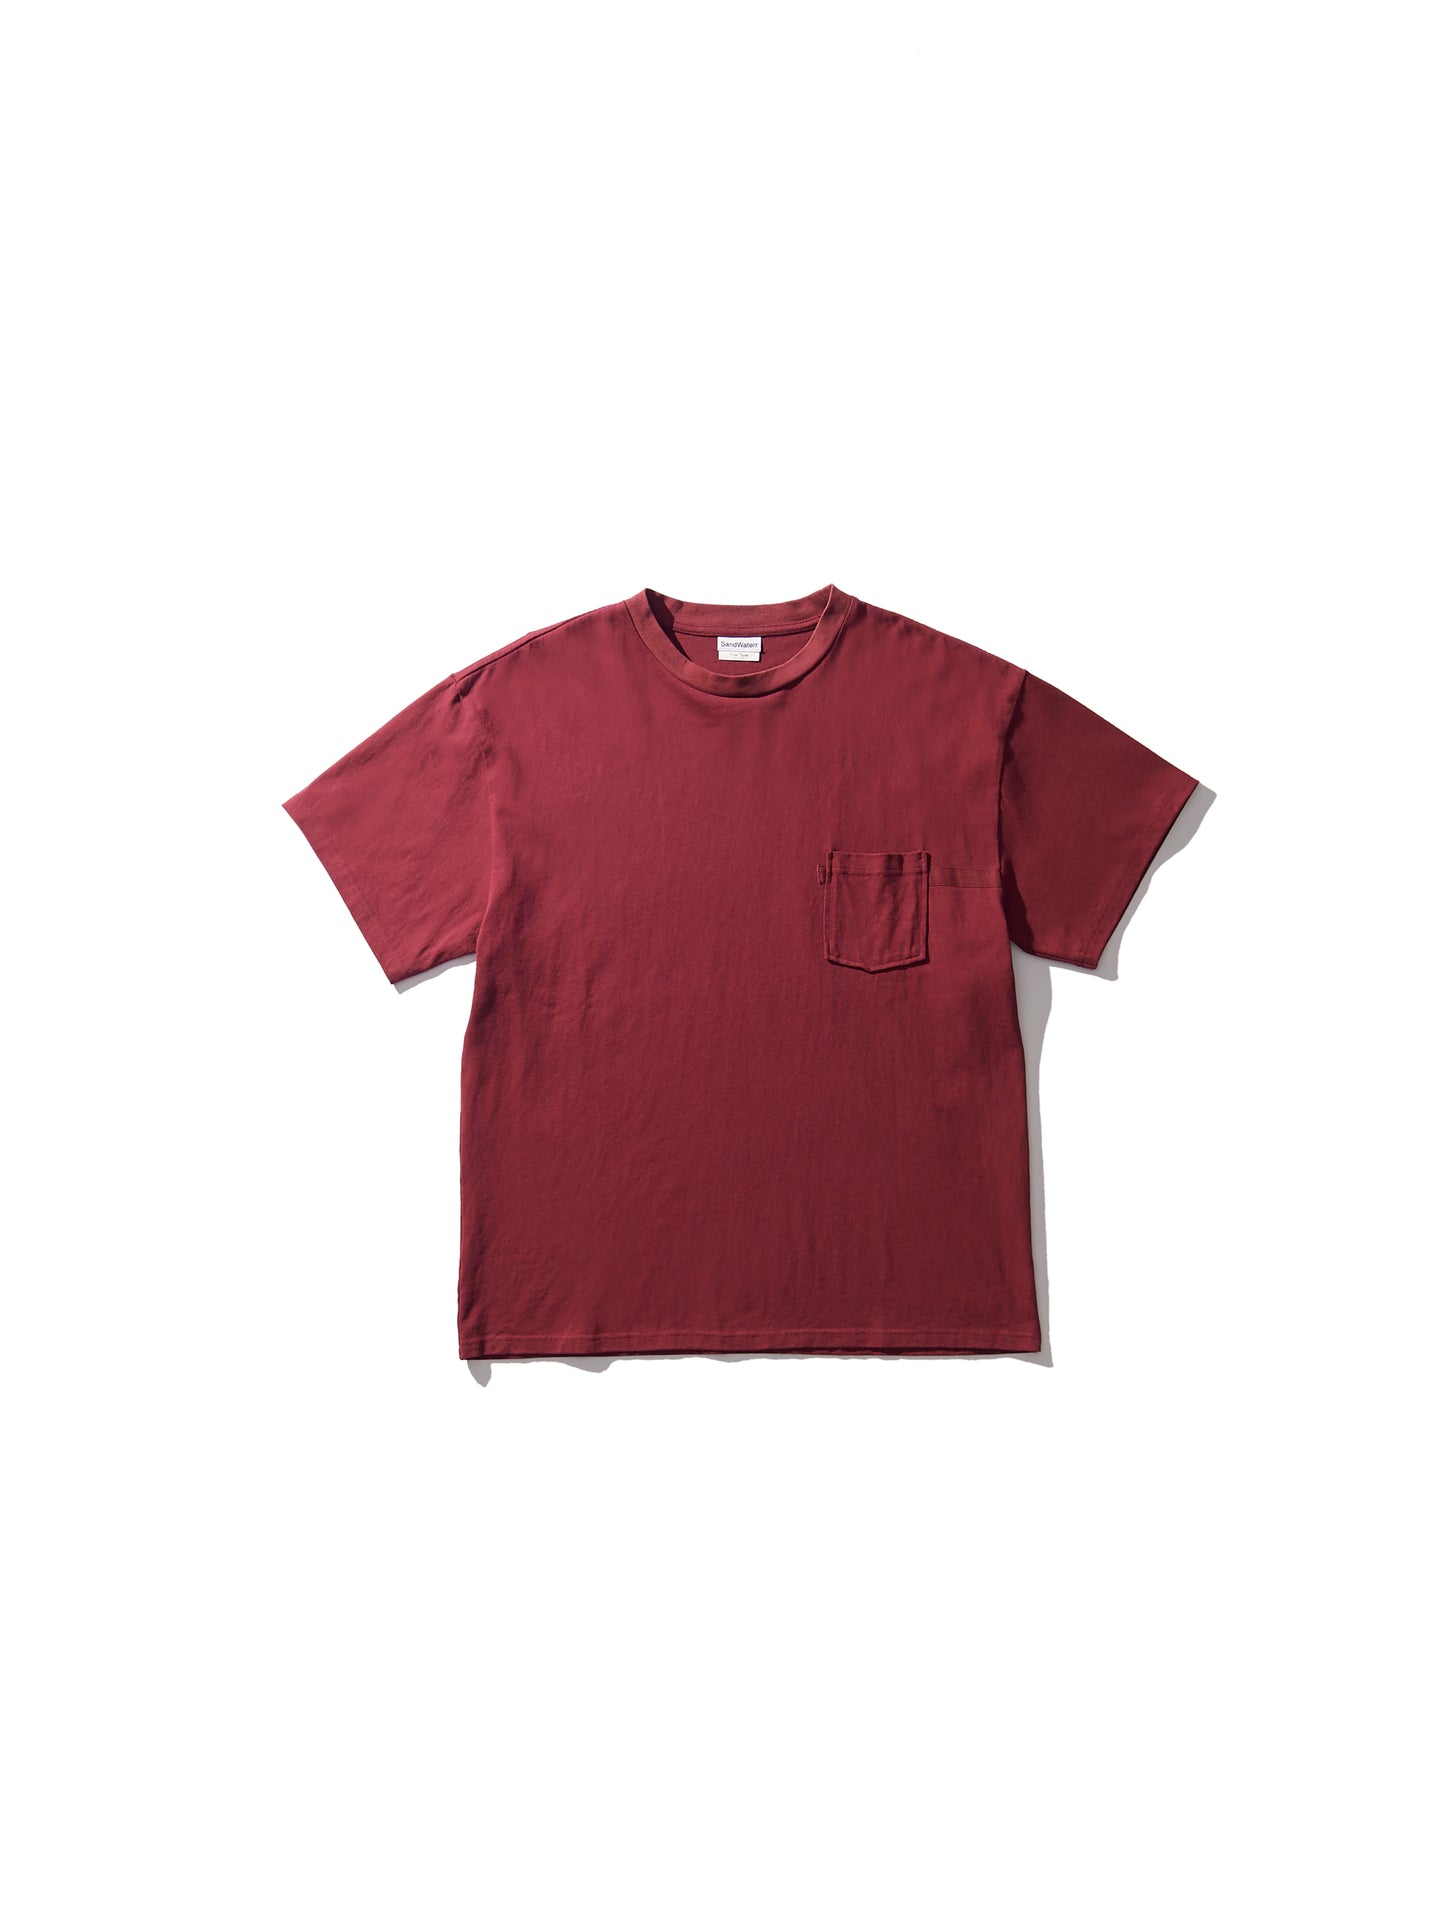 RESEARCHED POCKET TEE SS/ 10.5 oz C.JERSEY